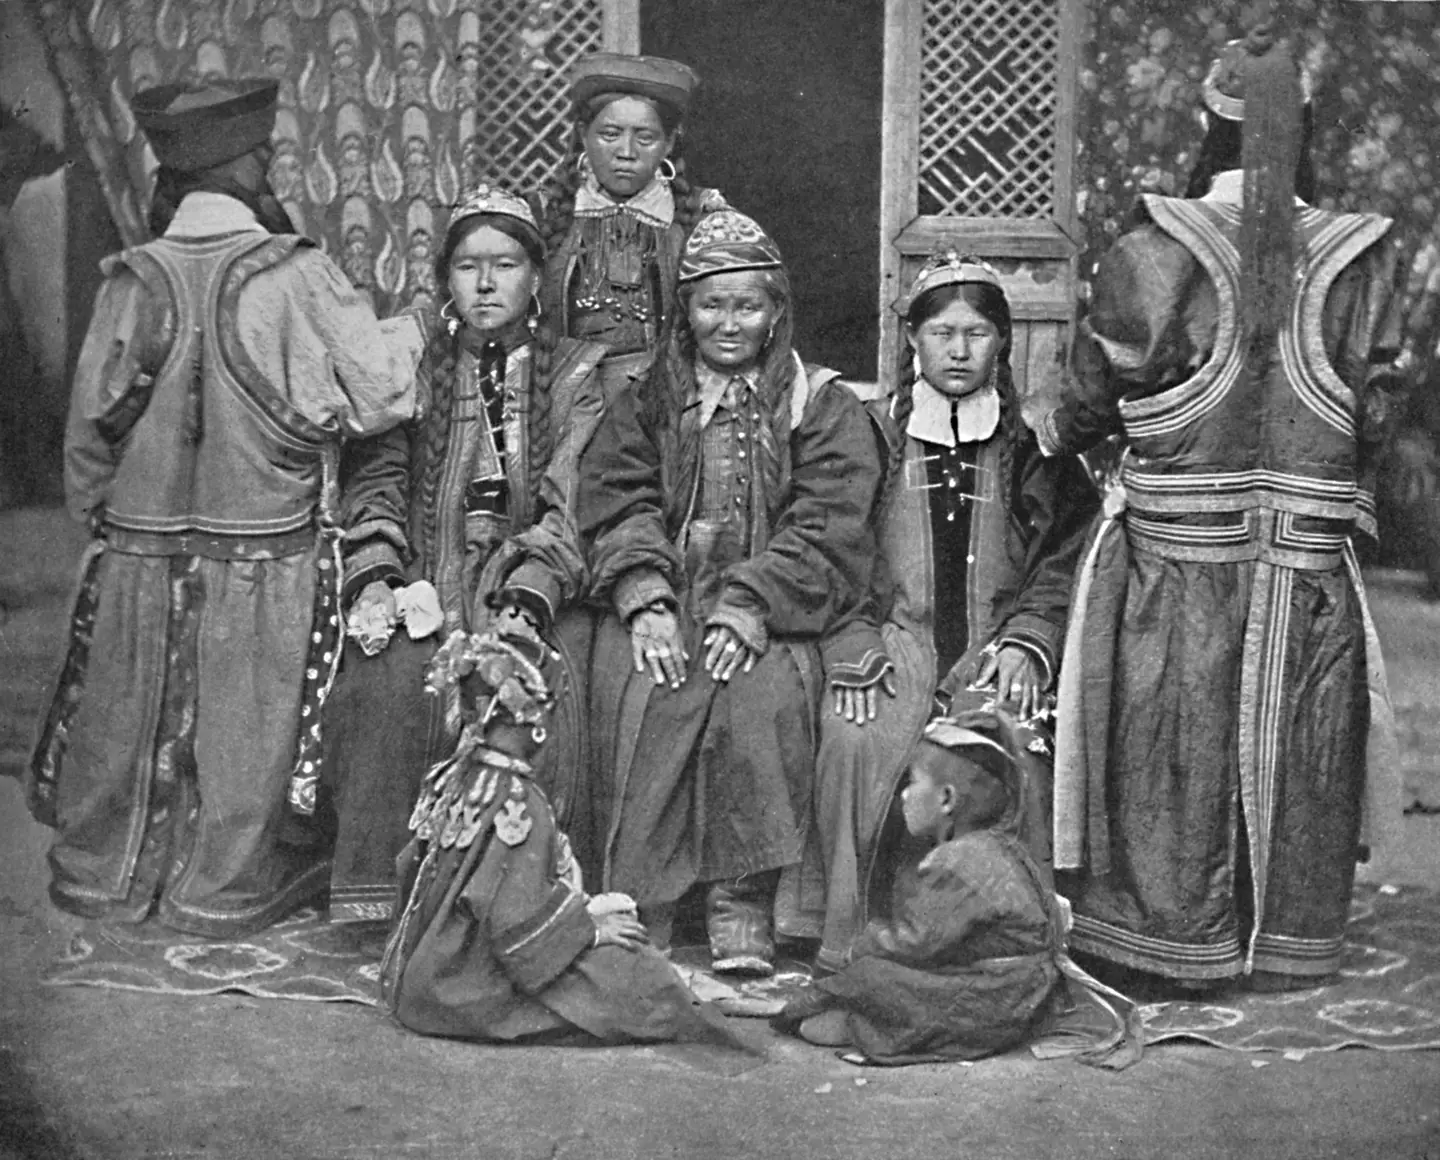 A group of Mongols, dated to 1902. (Print Collector/Getty Images)